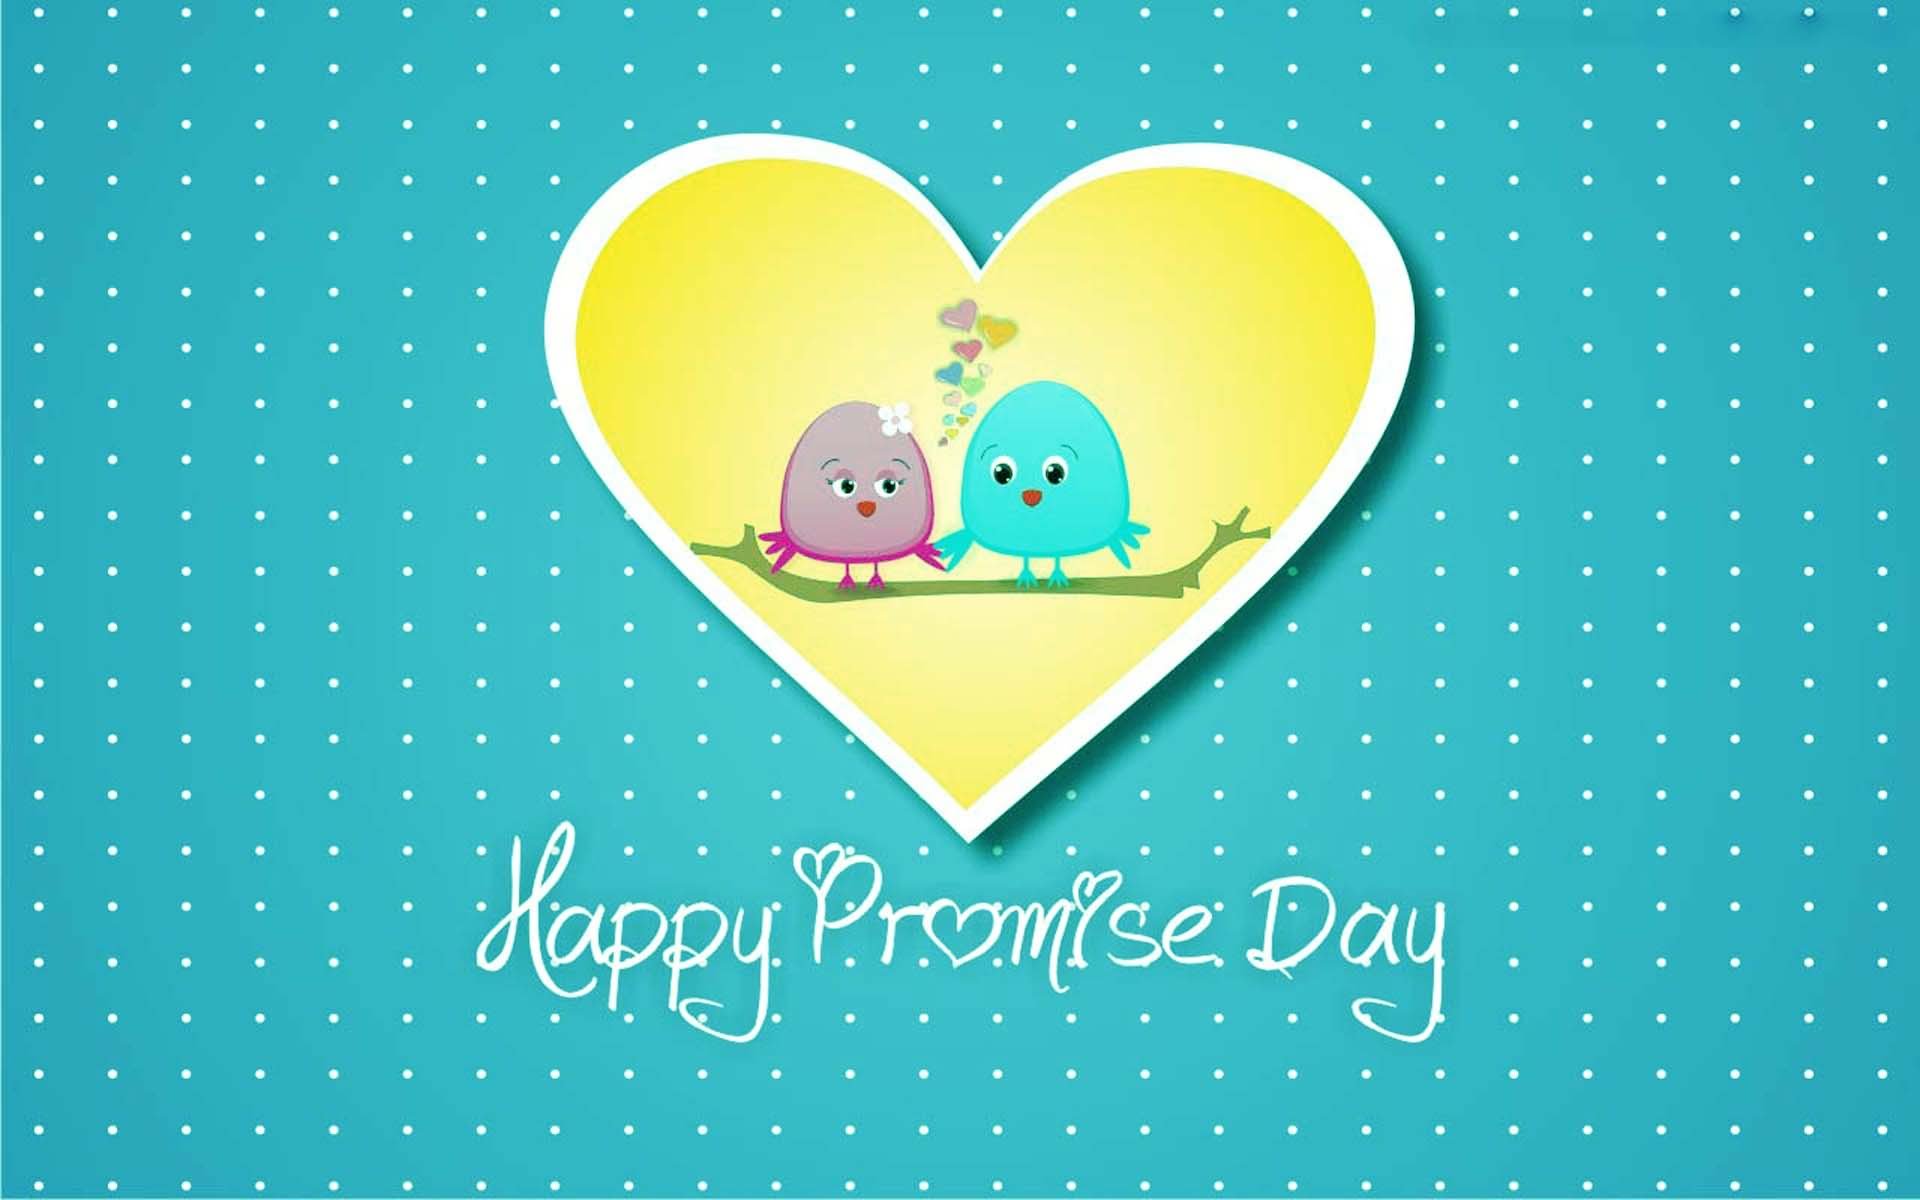 Happy Promise Day Greeting Card